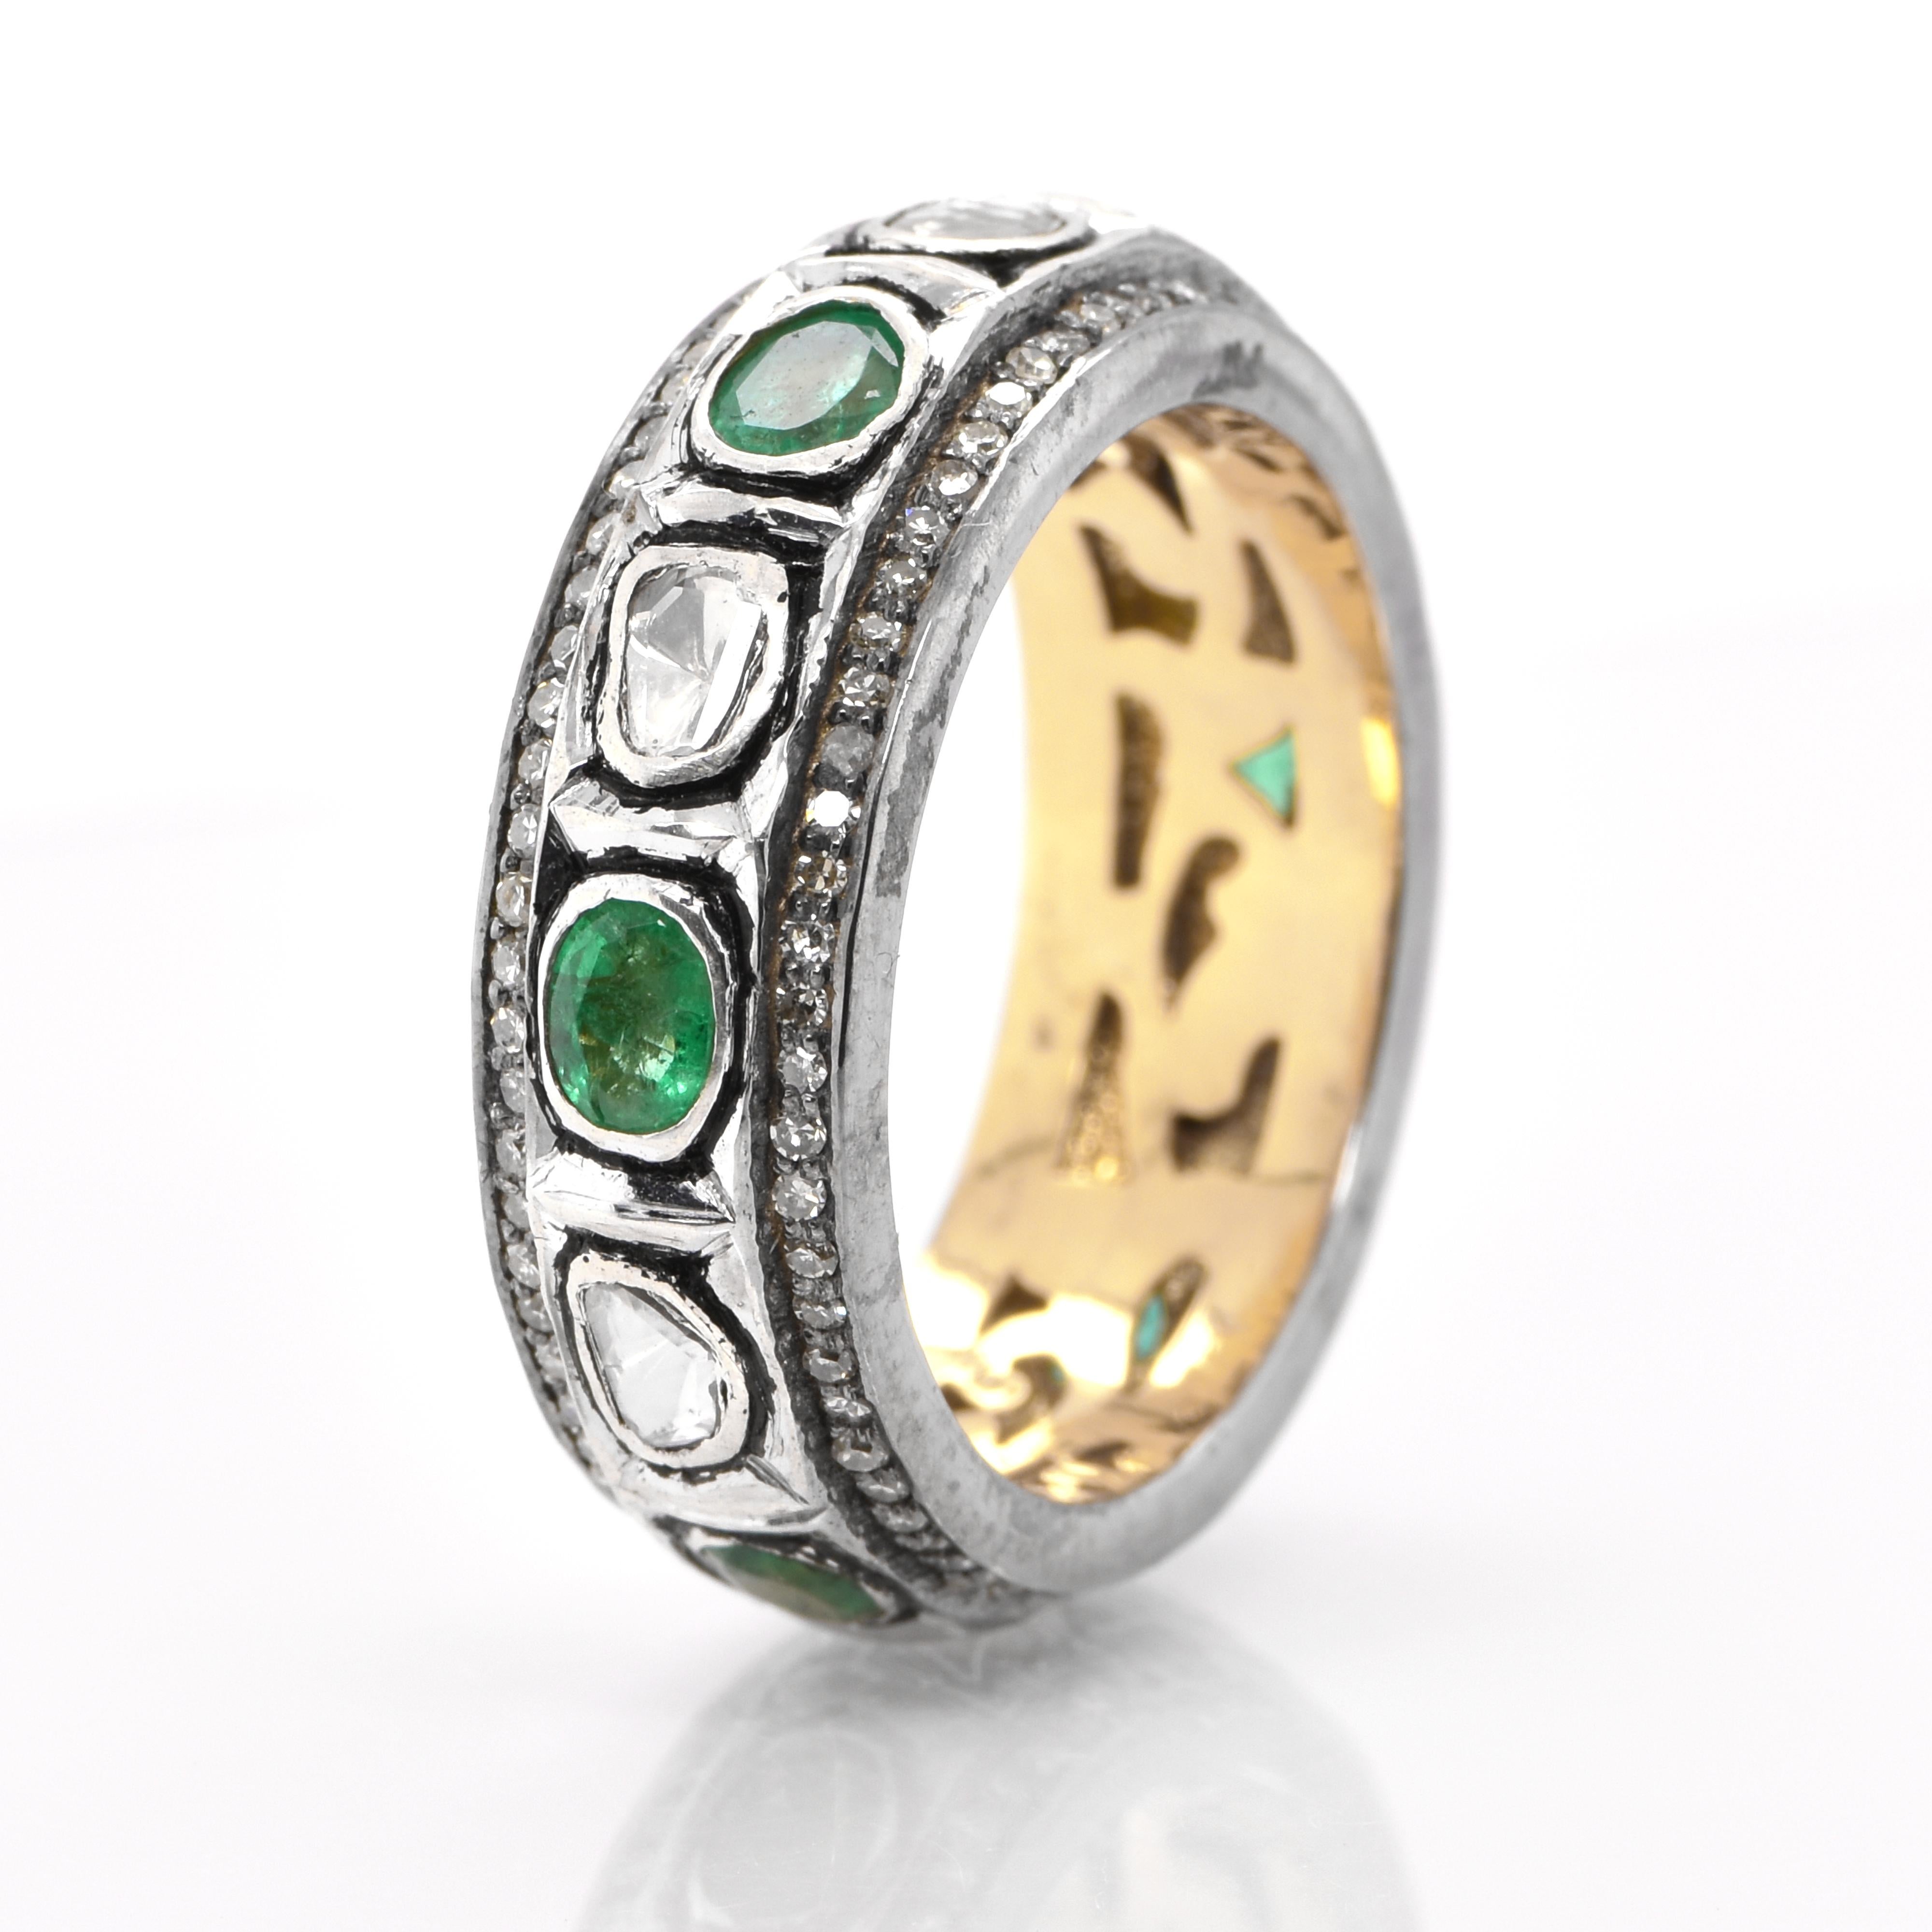 A stunning Victorian Style Eternity ring featuring a total of 0.91 Carats of Natural Emeralds and 0.26 Carats of Polki Diamonds set in Silver and Gold. People have admired emerald’s green for thousands of years. Emeralds have always been associated